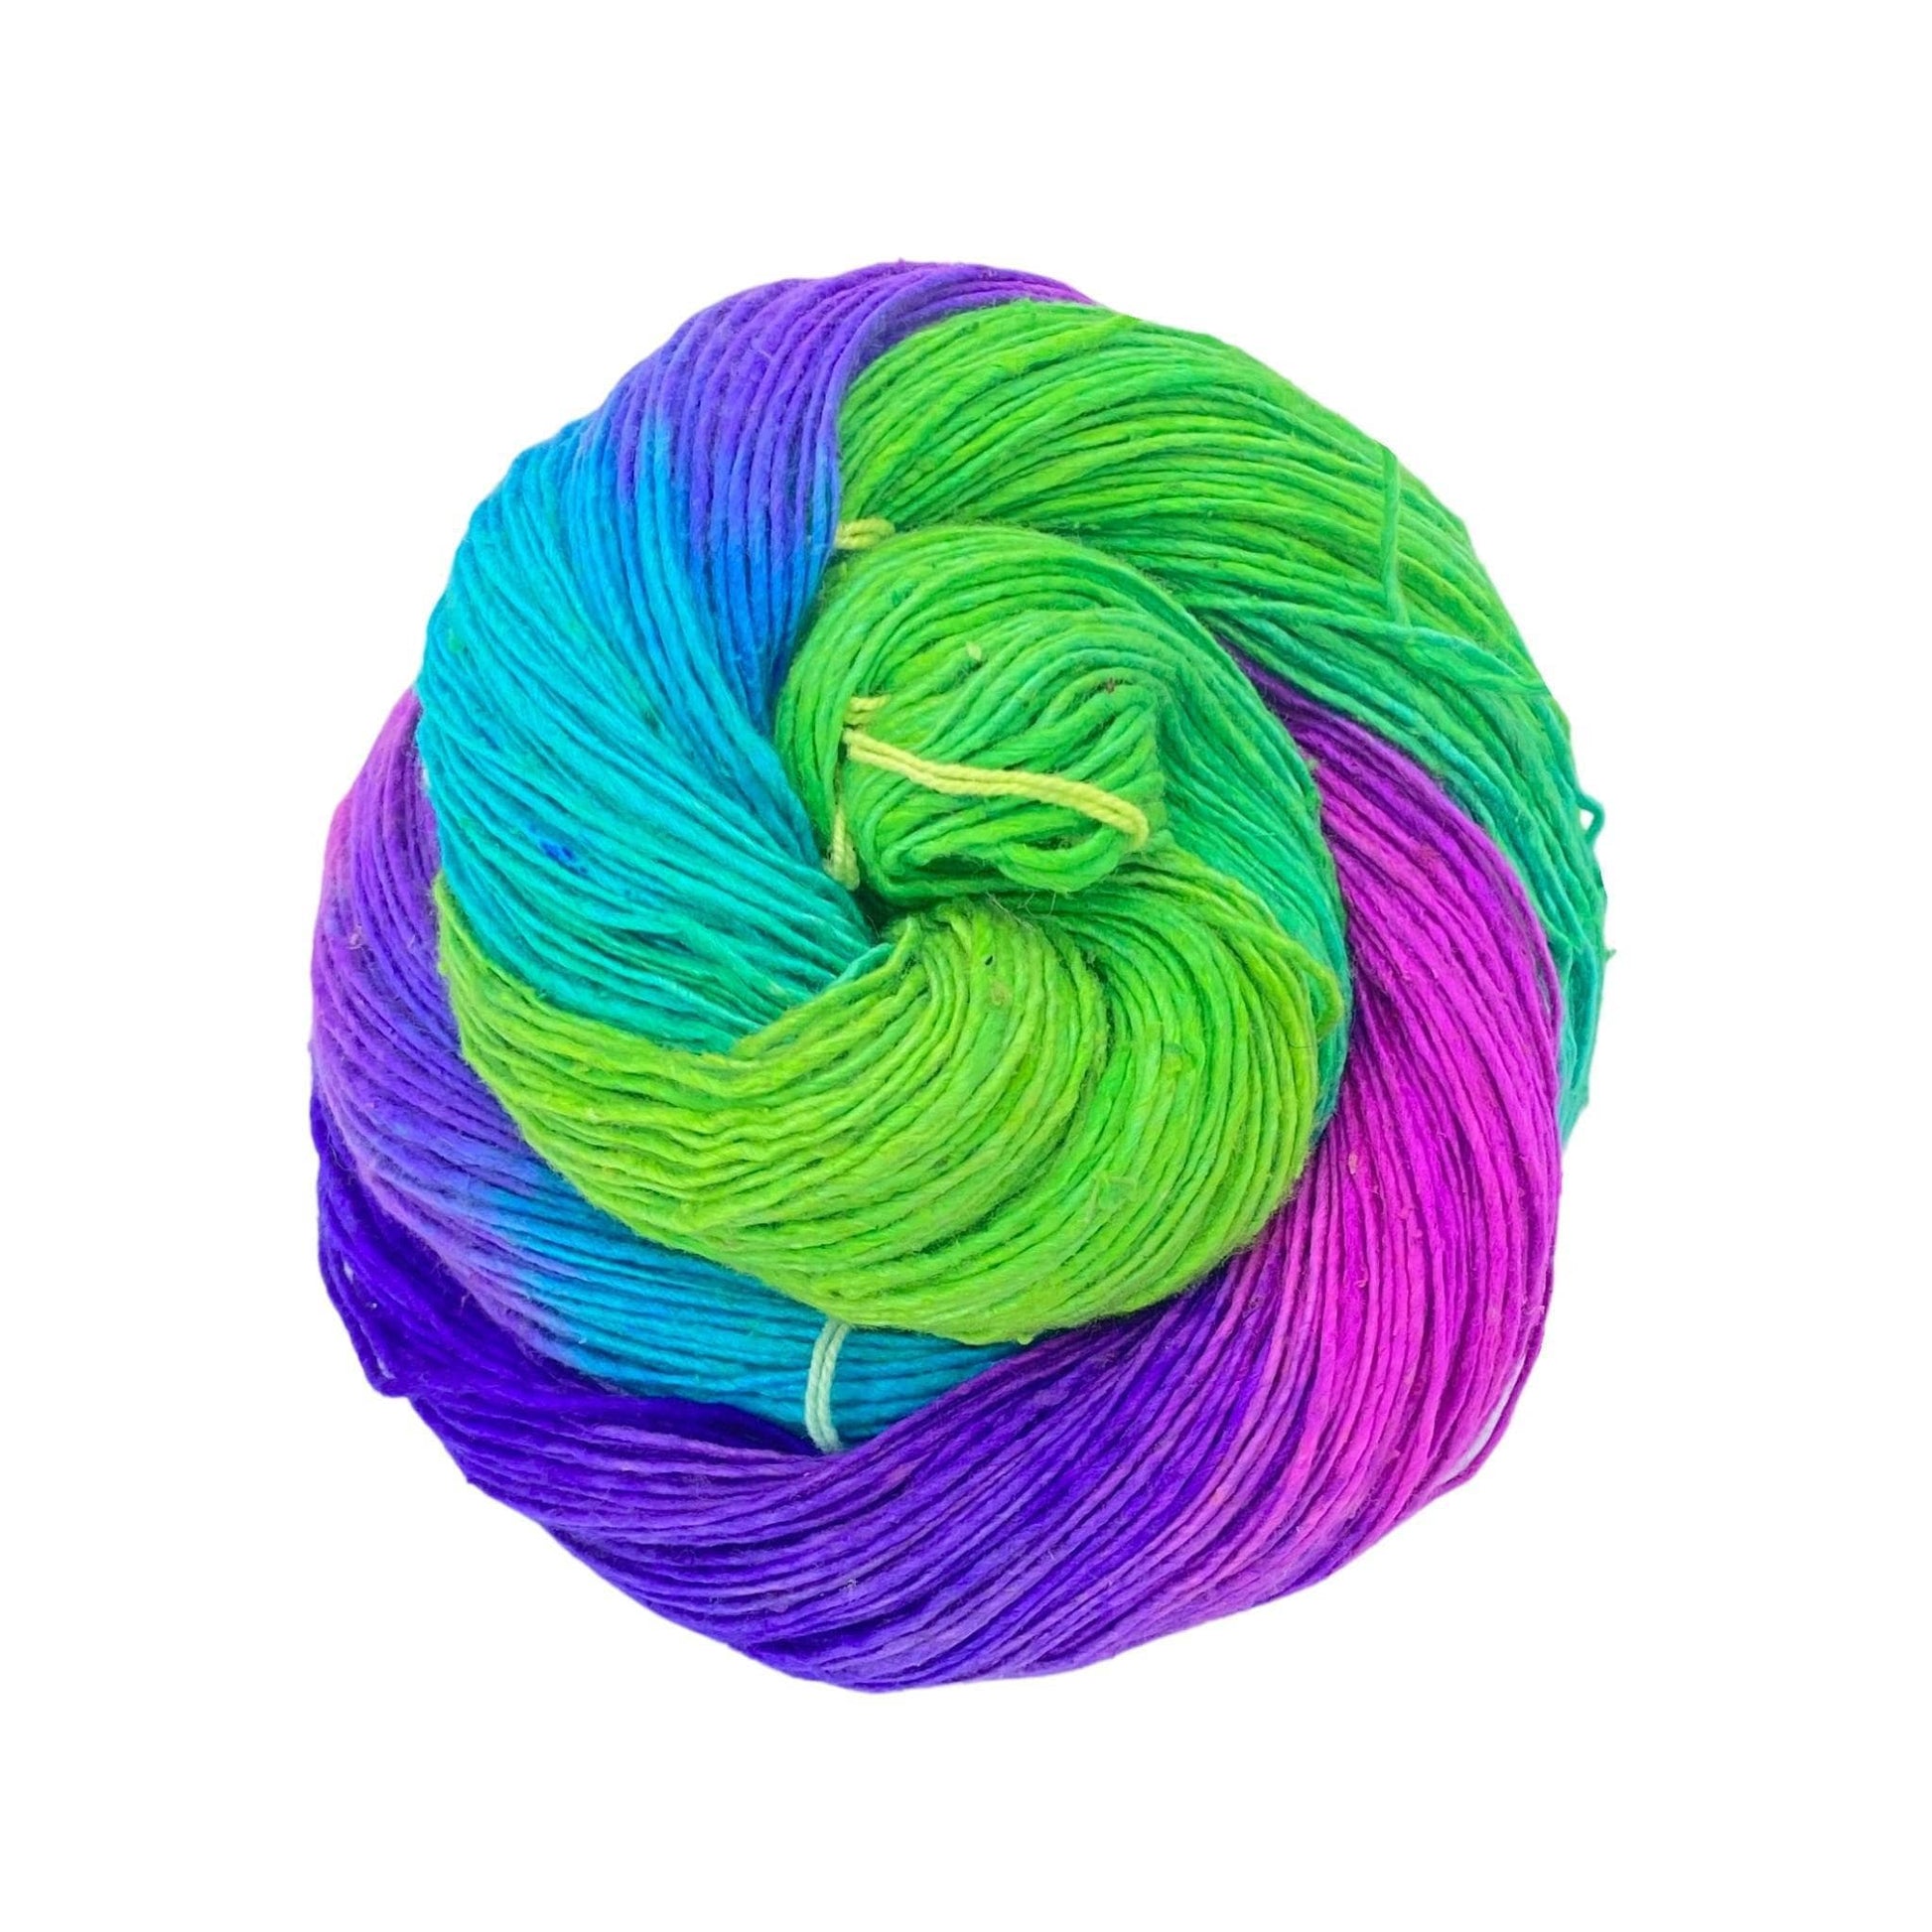 skein of single ply 100% recycled silk yarn in vibrant purple, green, blue, and pink variegated.